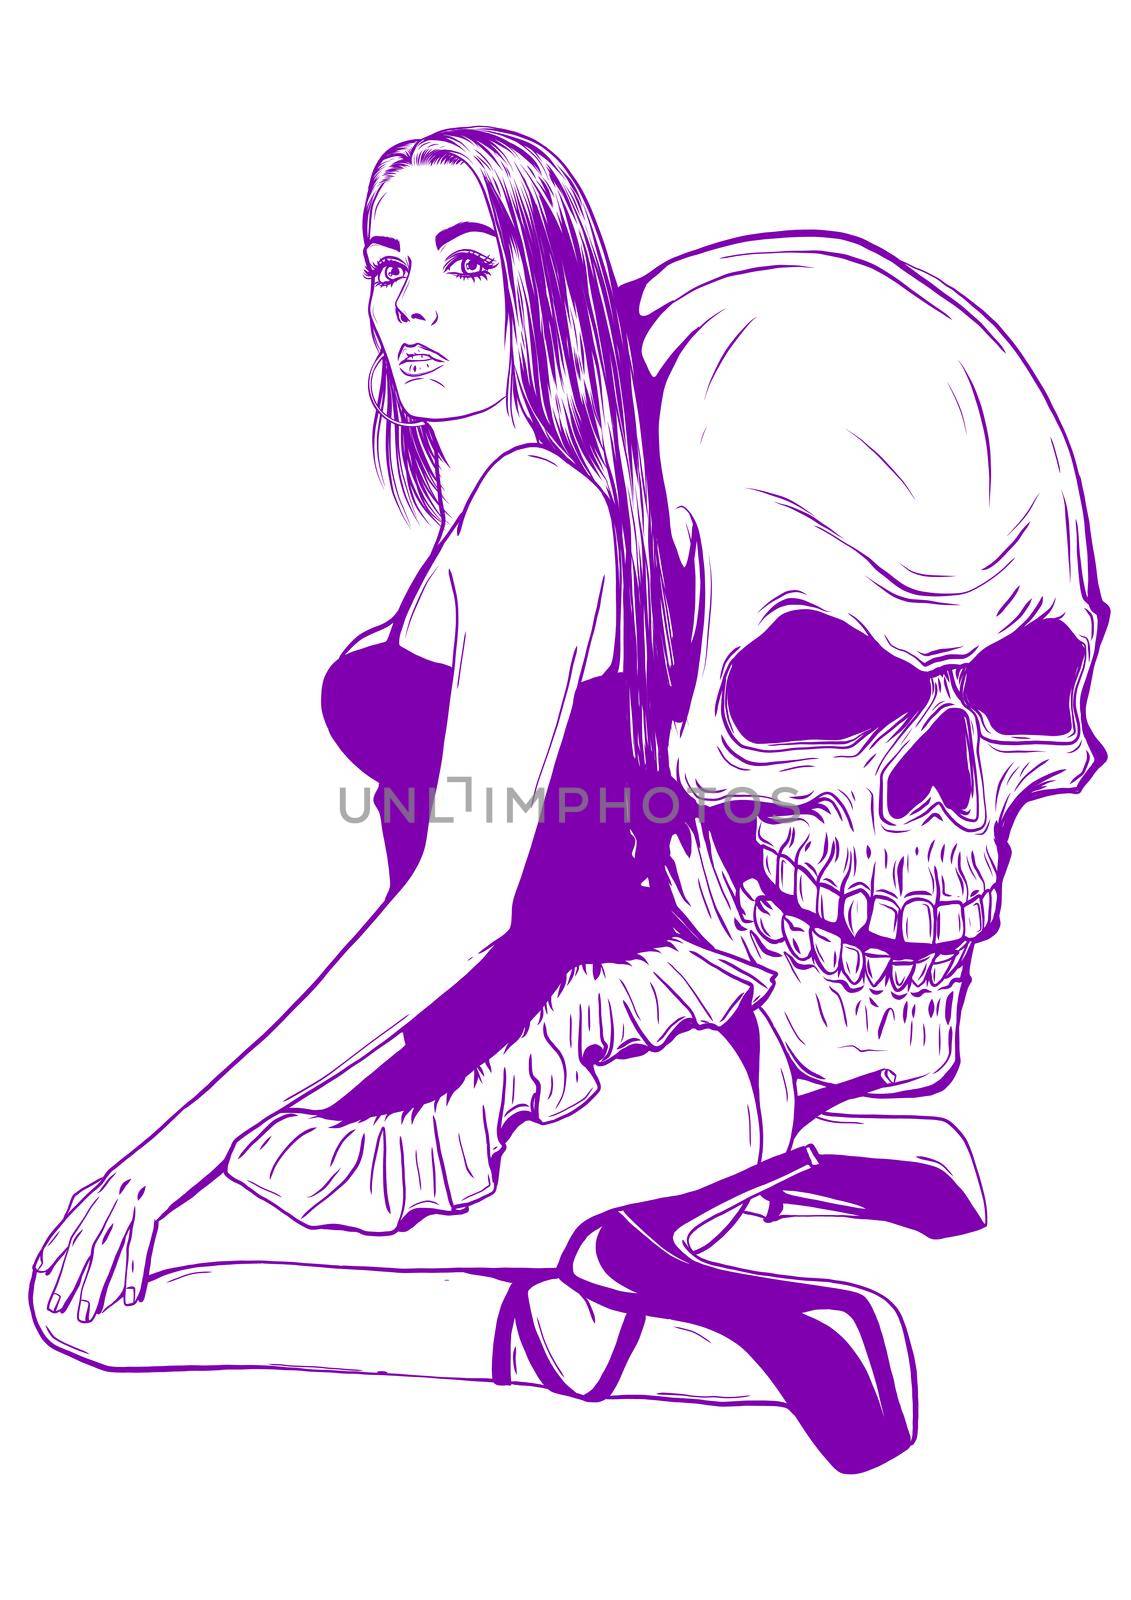 Girl with skeleton make up hand drawn sketch. Santa muerte woman witch portrait stock illustration Day of the dead face art by dean